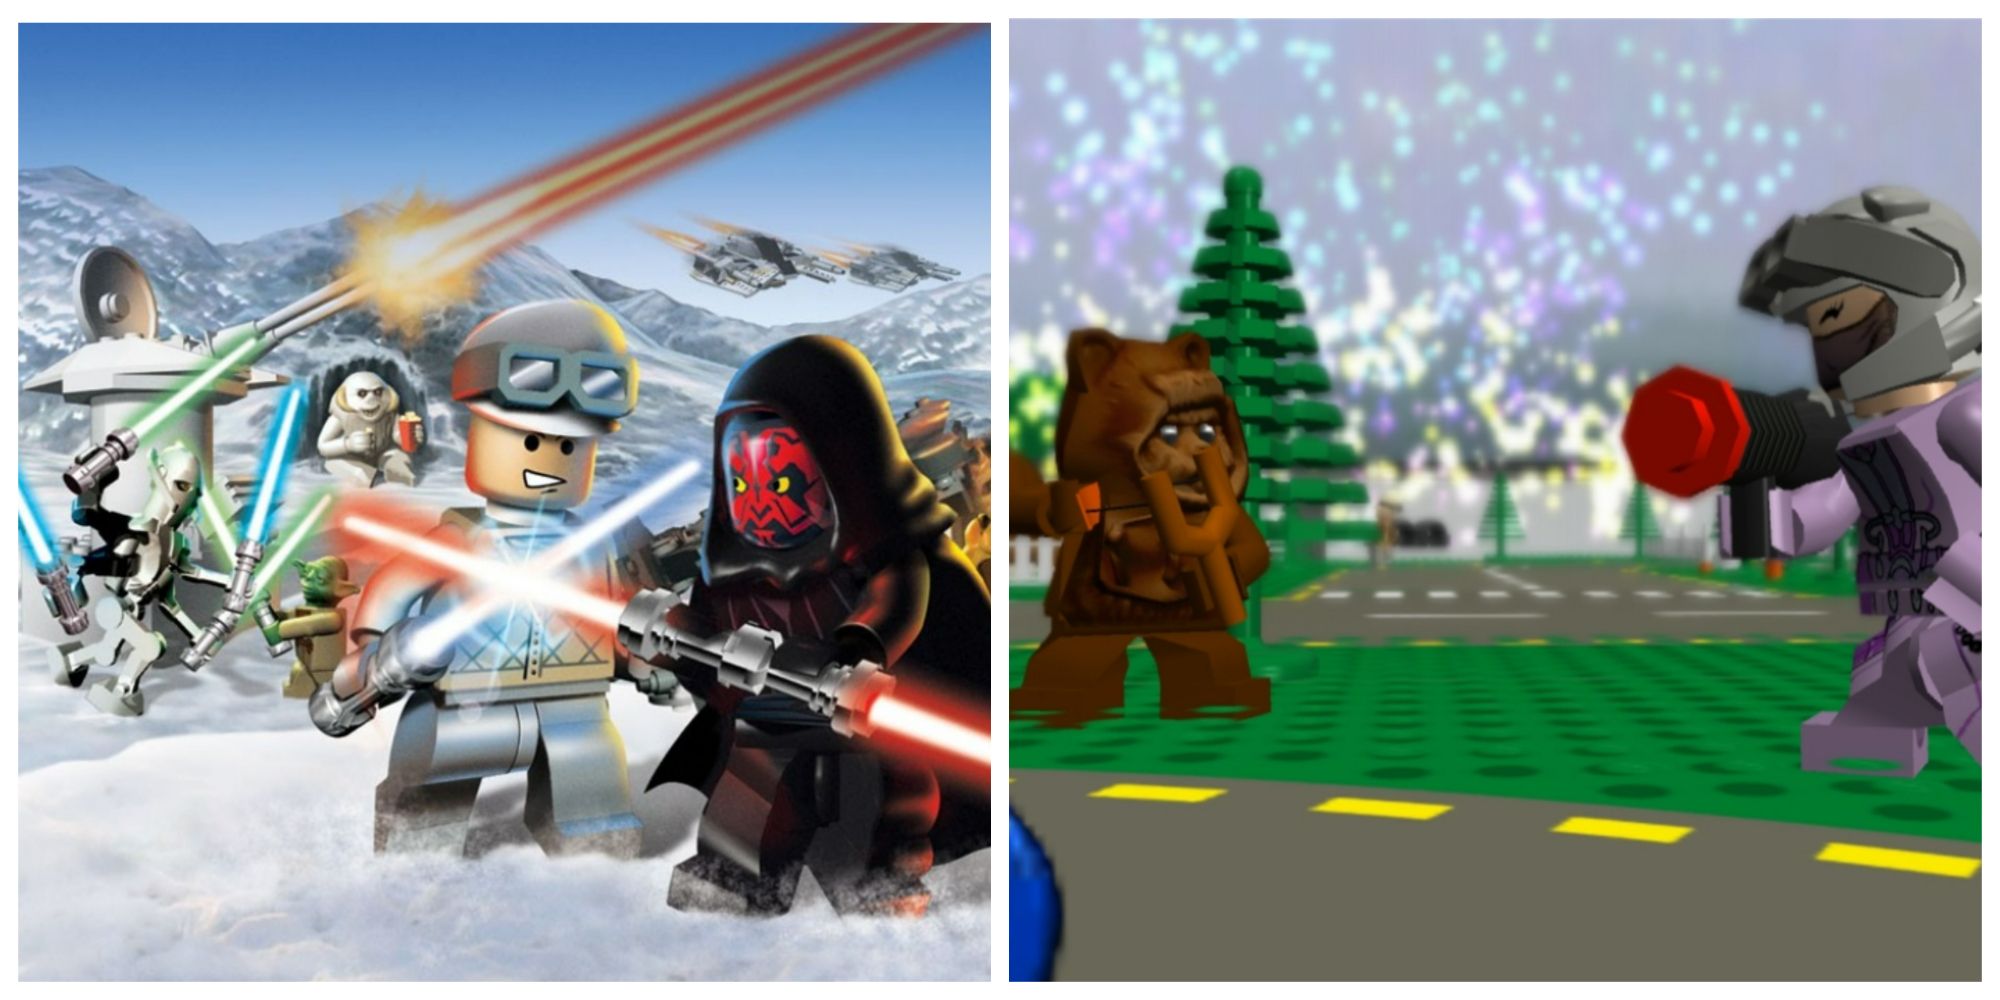 Multiple characters in Lego Star Wars: The Complete Saga.